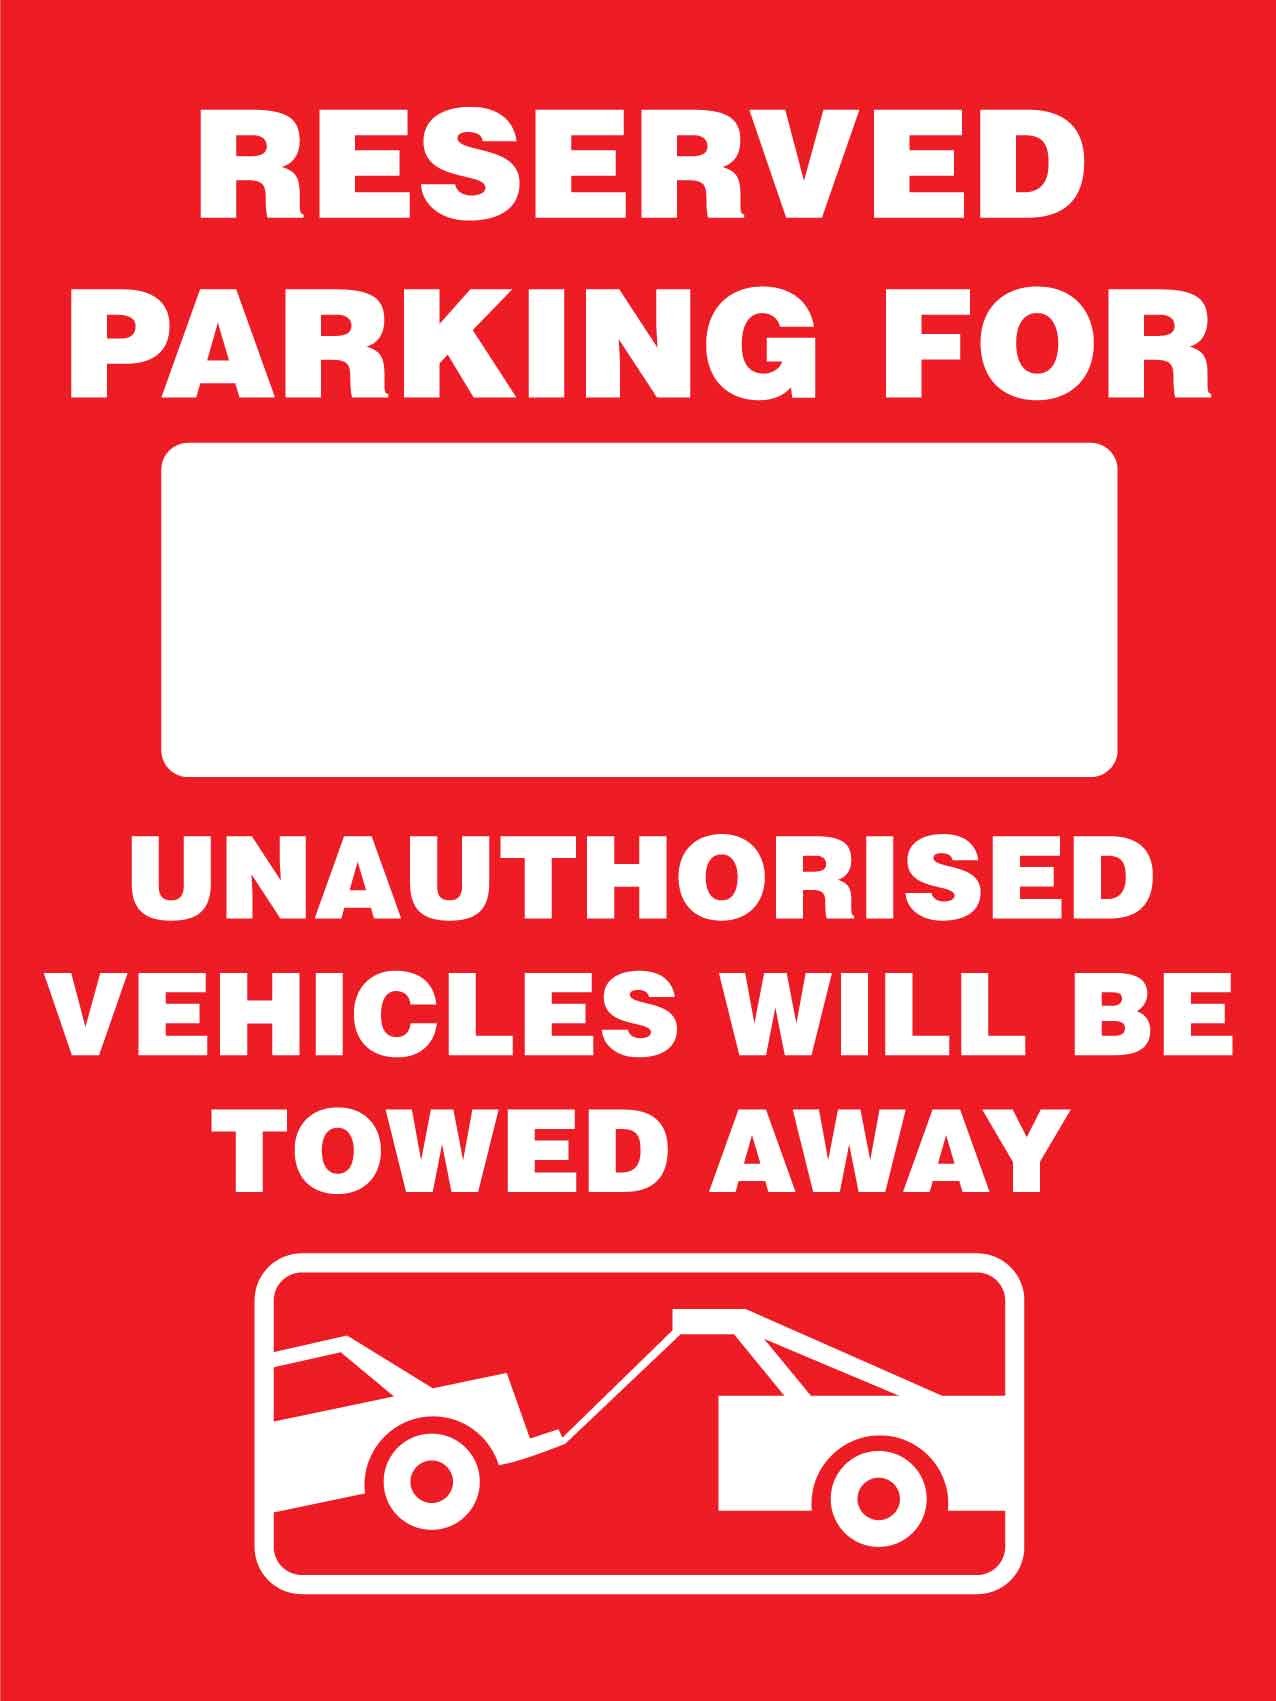 Reserved Parking For .... Unauthorised Vehicles Will Be Towed Away Sign